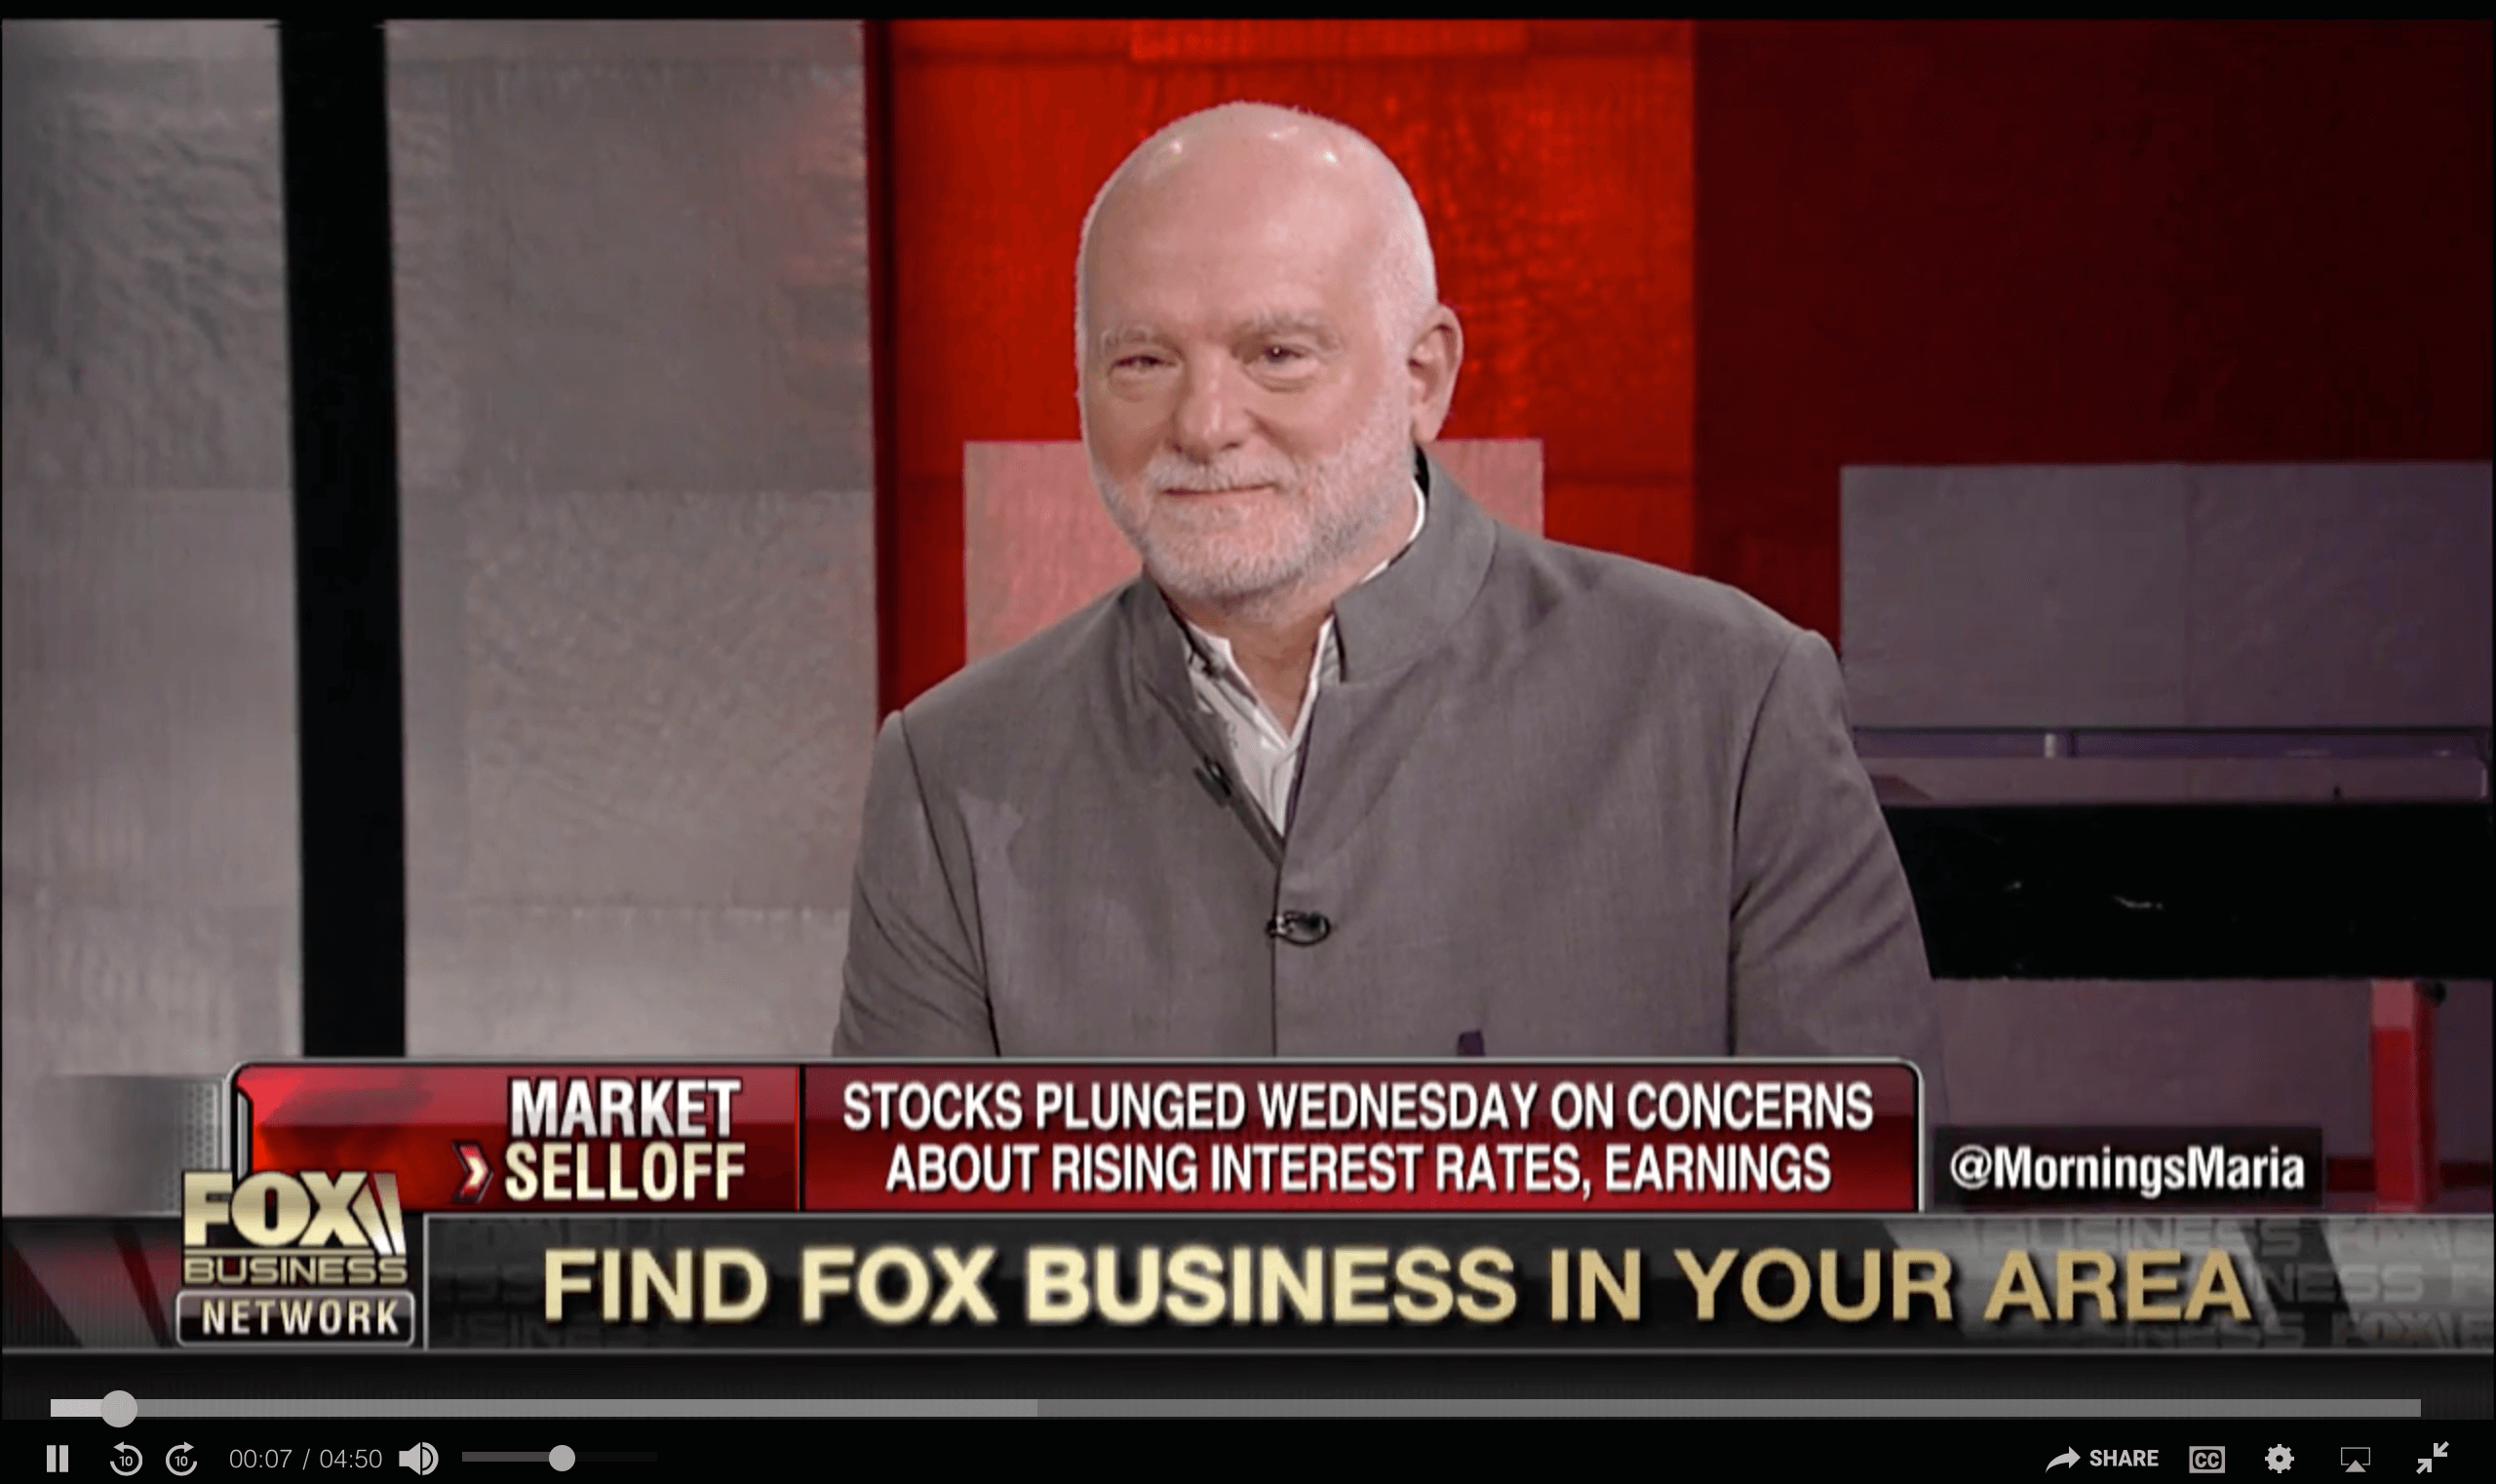 PART ONE: TIGER 21 FOUNDER DISCUSSES THE MARKET SELLOFF ON FOX BUSINESS